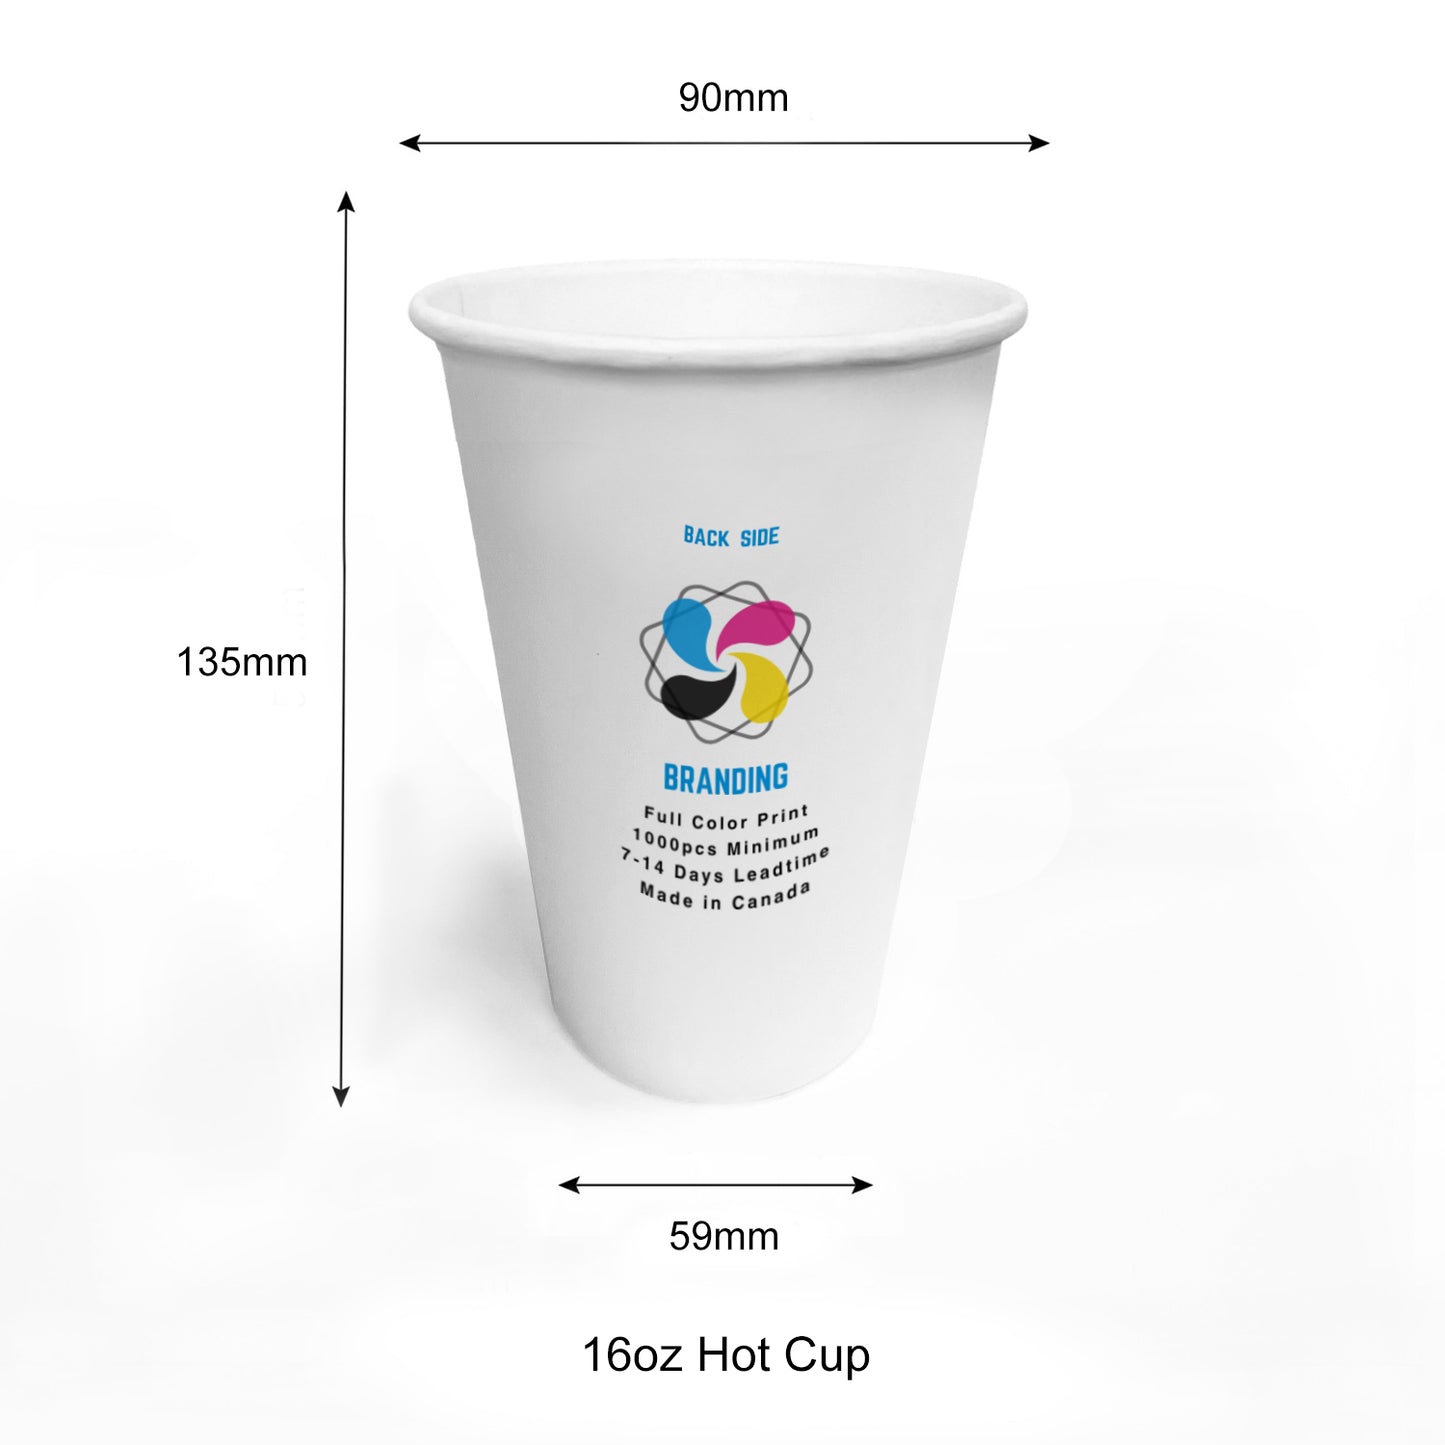 1000pcs 16oz, 473ml Single Wall White Paper Hot Cups with 90mm Opening; Full Color Custom Print, Printed in Canada